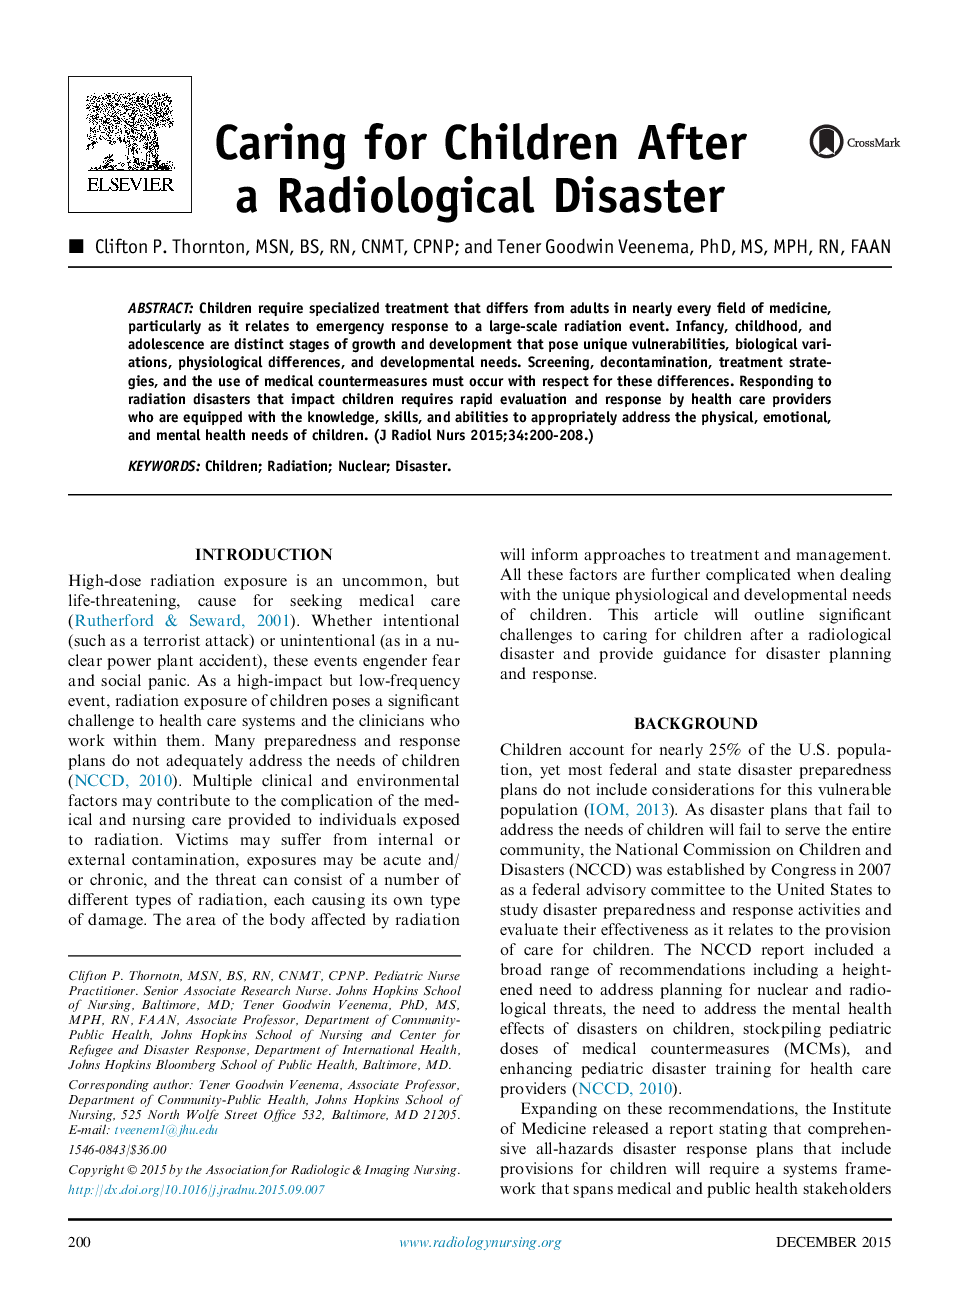 Caring for Children After a Radiological Disaster